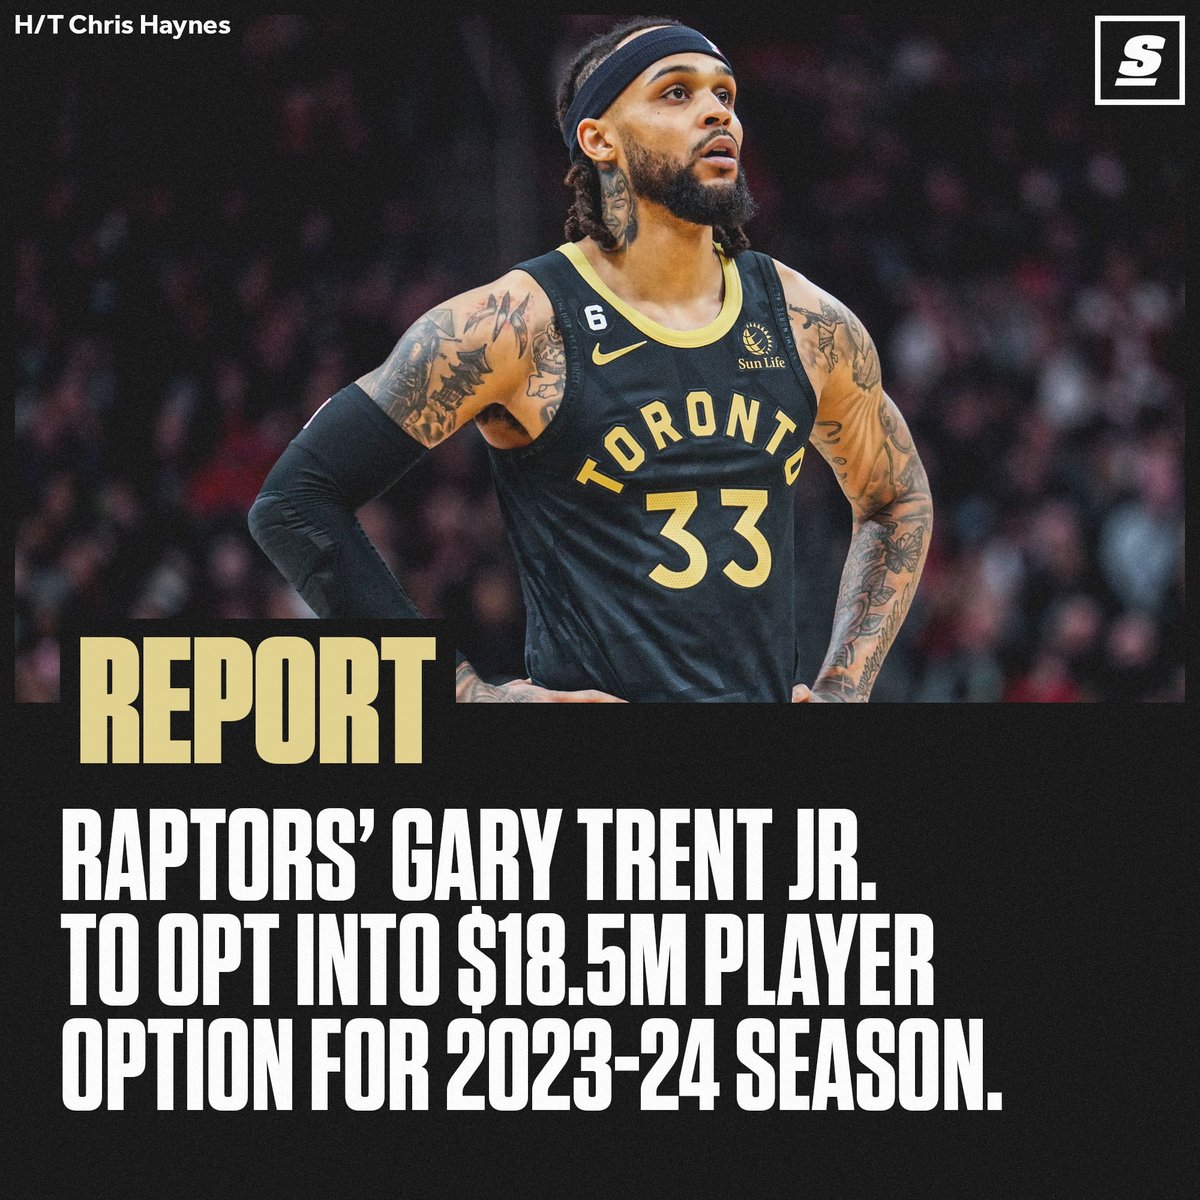 Raptors' Gary Trent Jr. reportedly opts in and will not be hitting free agency this summer. 🦖